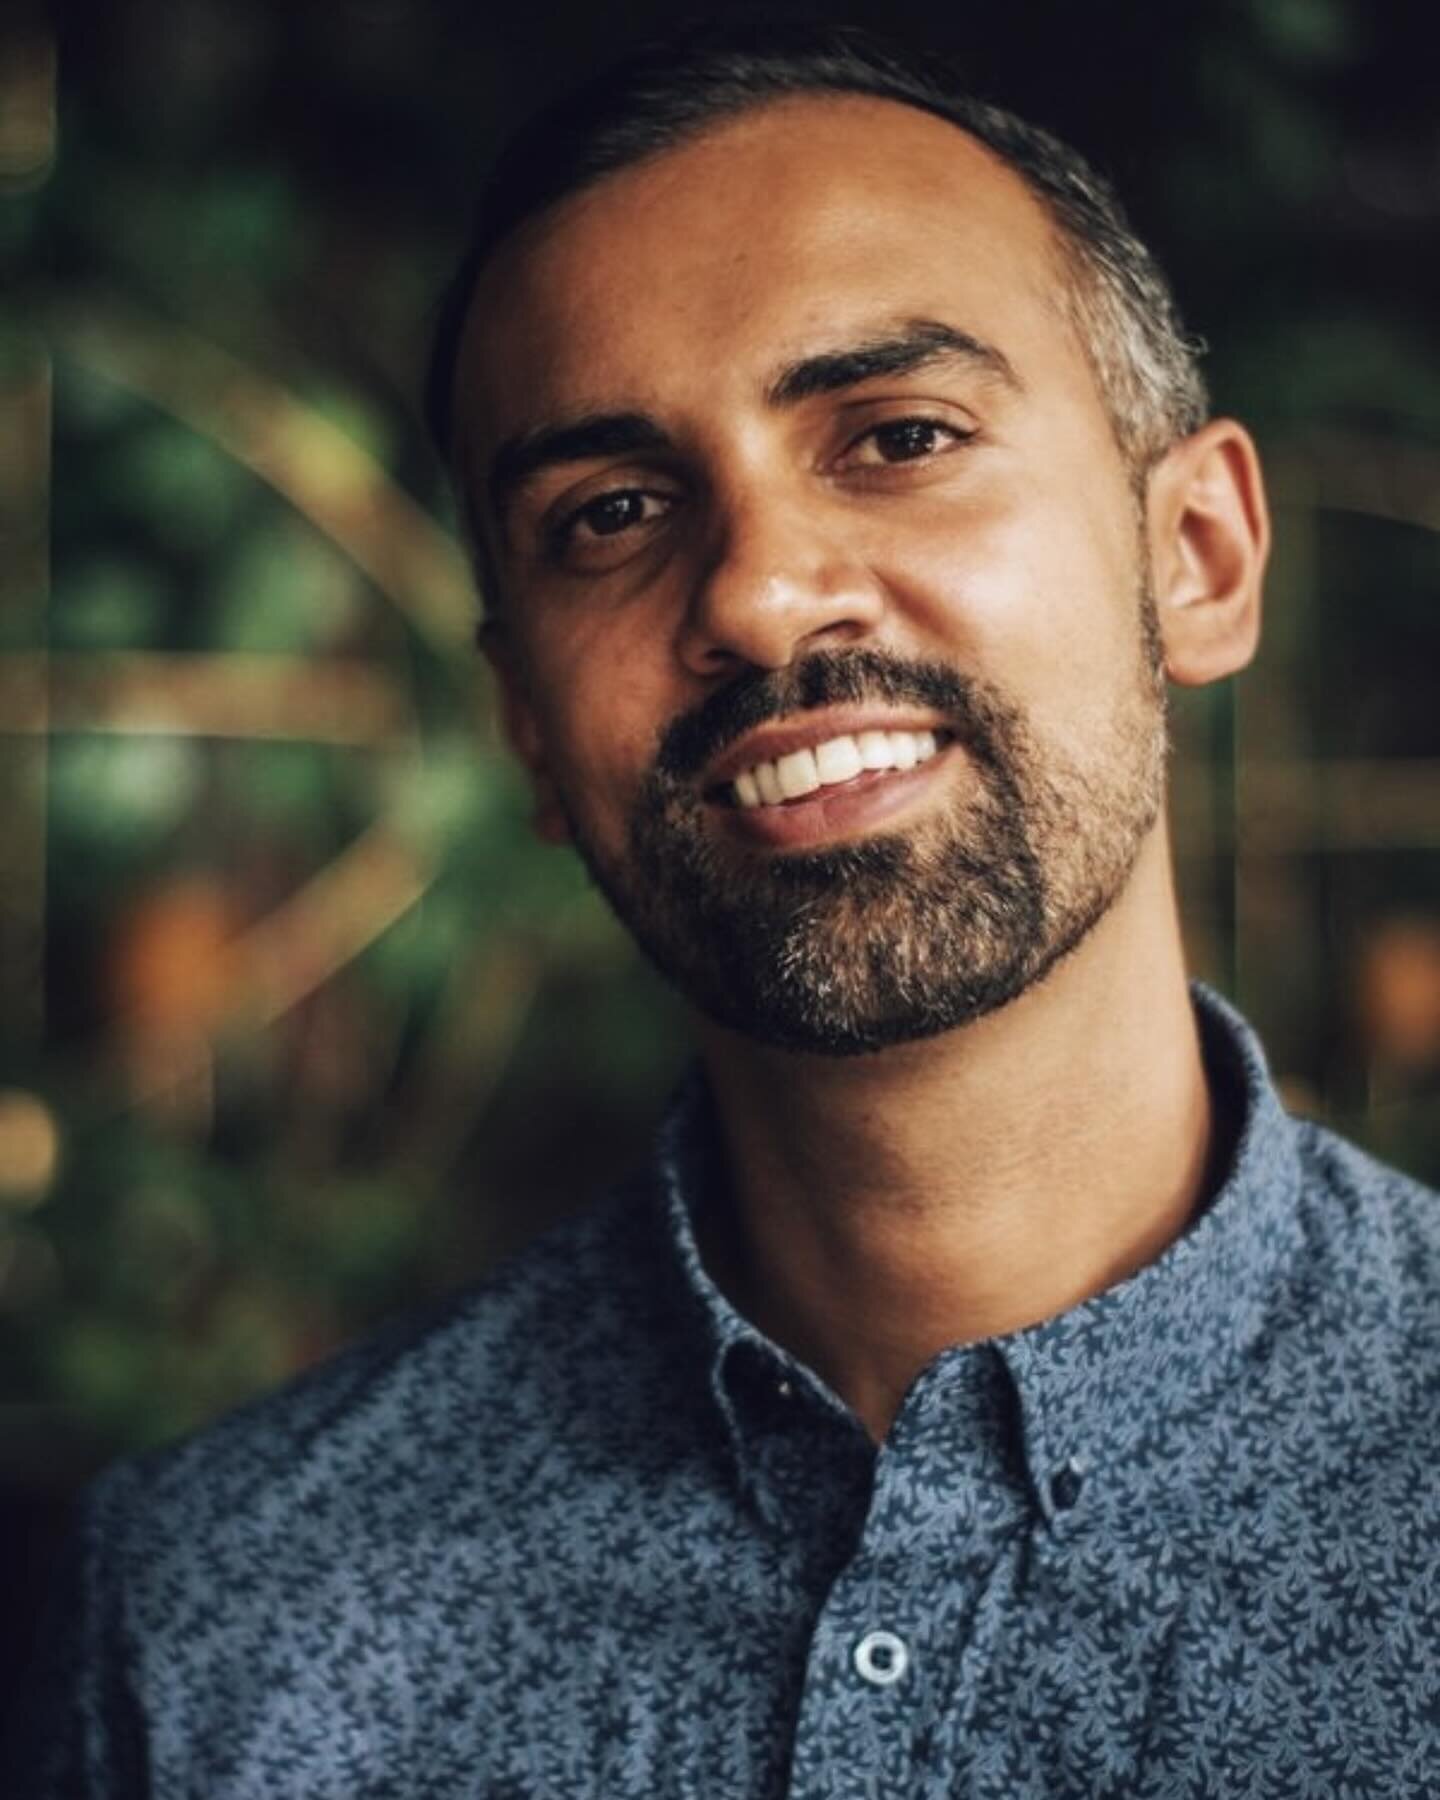 Shayan is a Creativity Coach with a training background in psychotherapy and coaching working with professionals, creatives and entrepreneurs. 

His coaching DNA 🧬: developing awareness &amp; nurturing the creative process through experimentation to